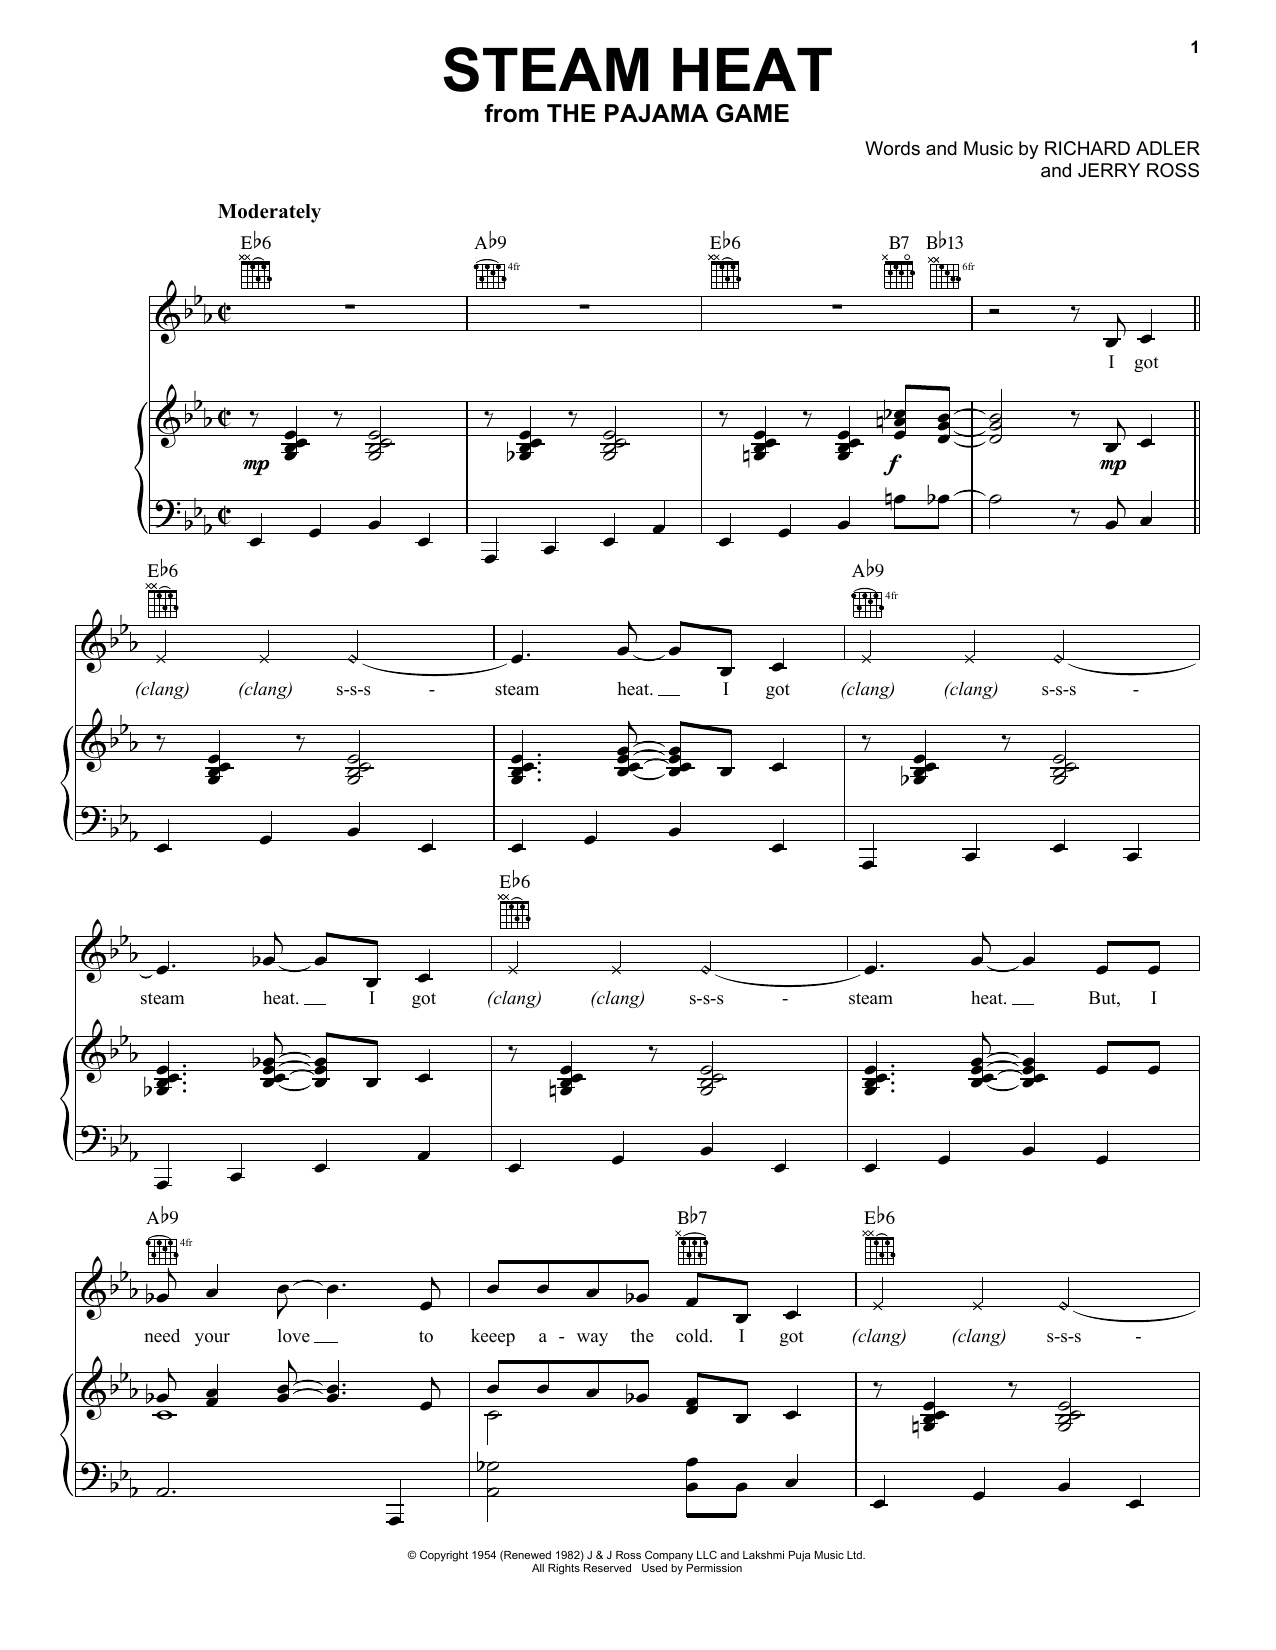 Download Adler & Ross Steam Heat sheet music and printable PDF score & Jazz music notes